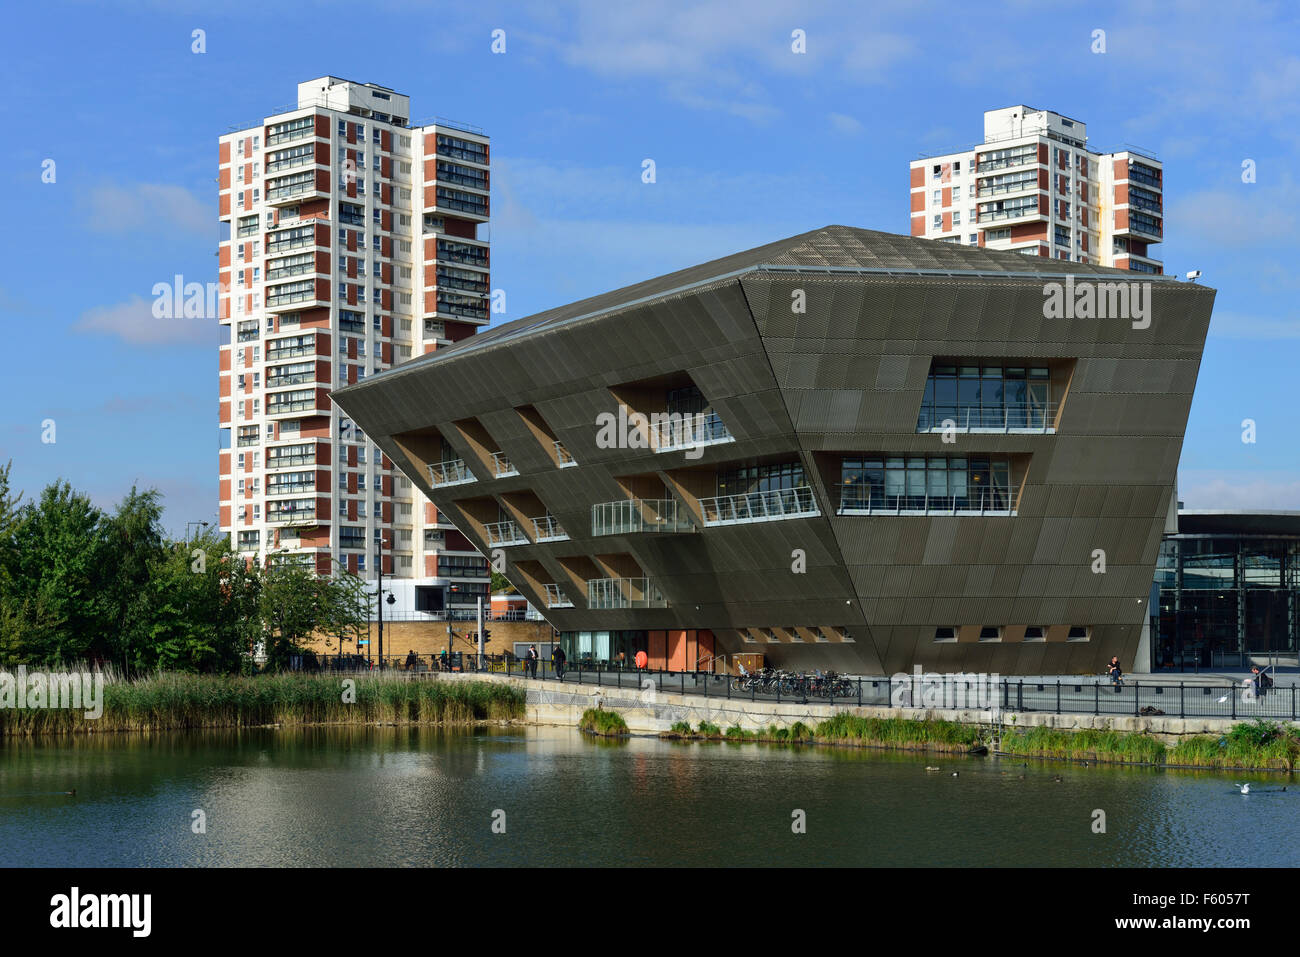 Canada Water Library, Rotherhithe, London SE16, United Kingdom Stock Photo